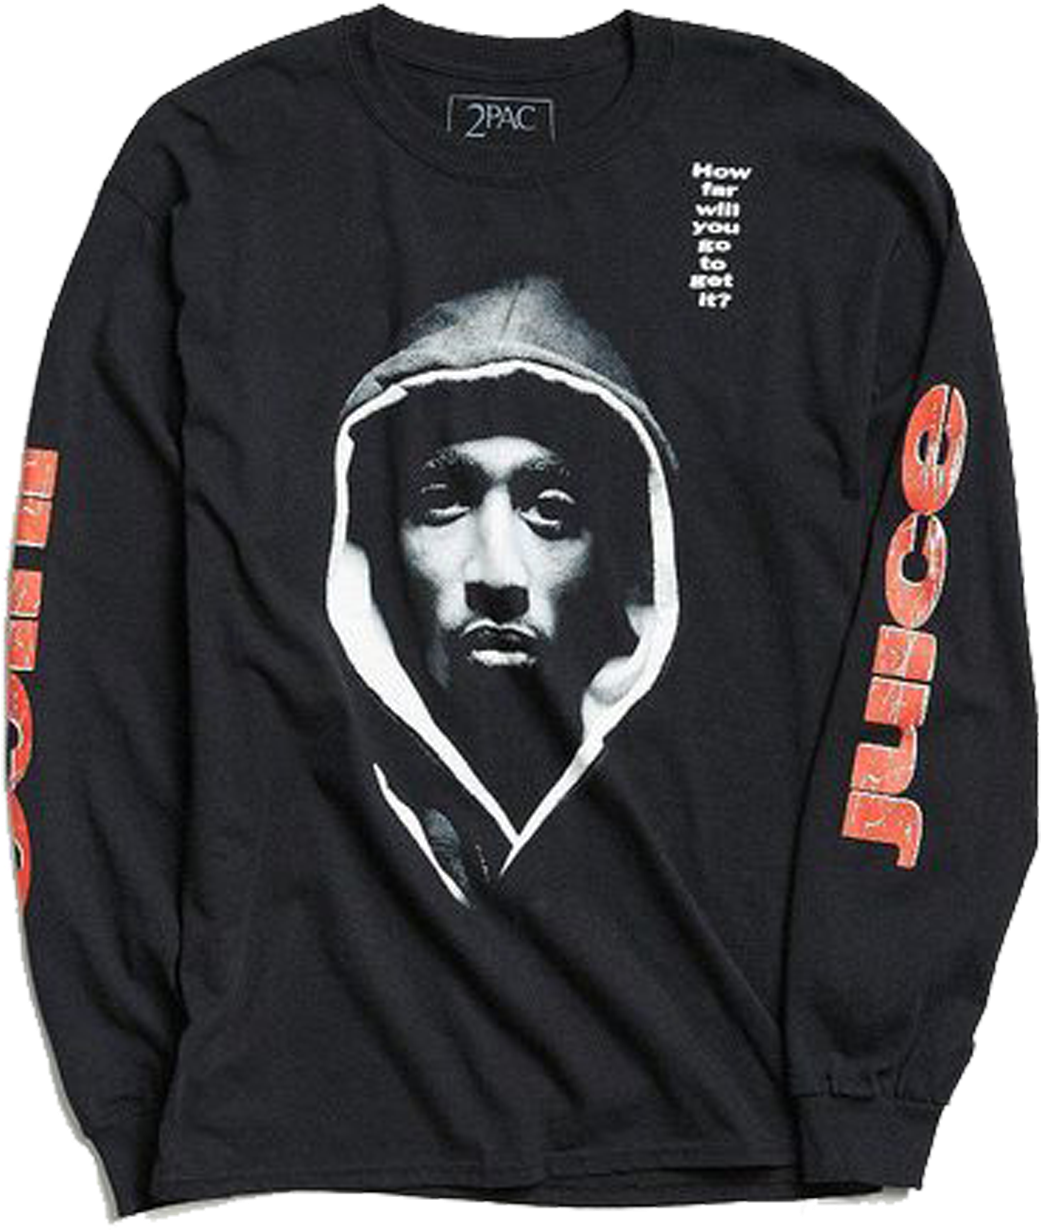 A Black Sweatshirt With A Picture Of A Man In A Hood